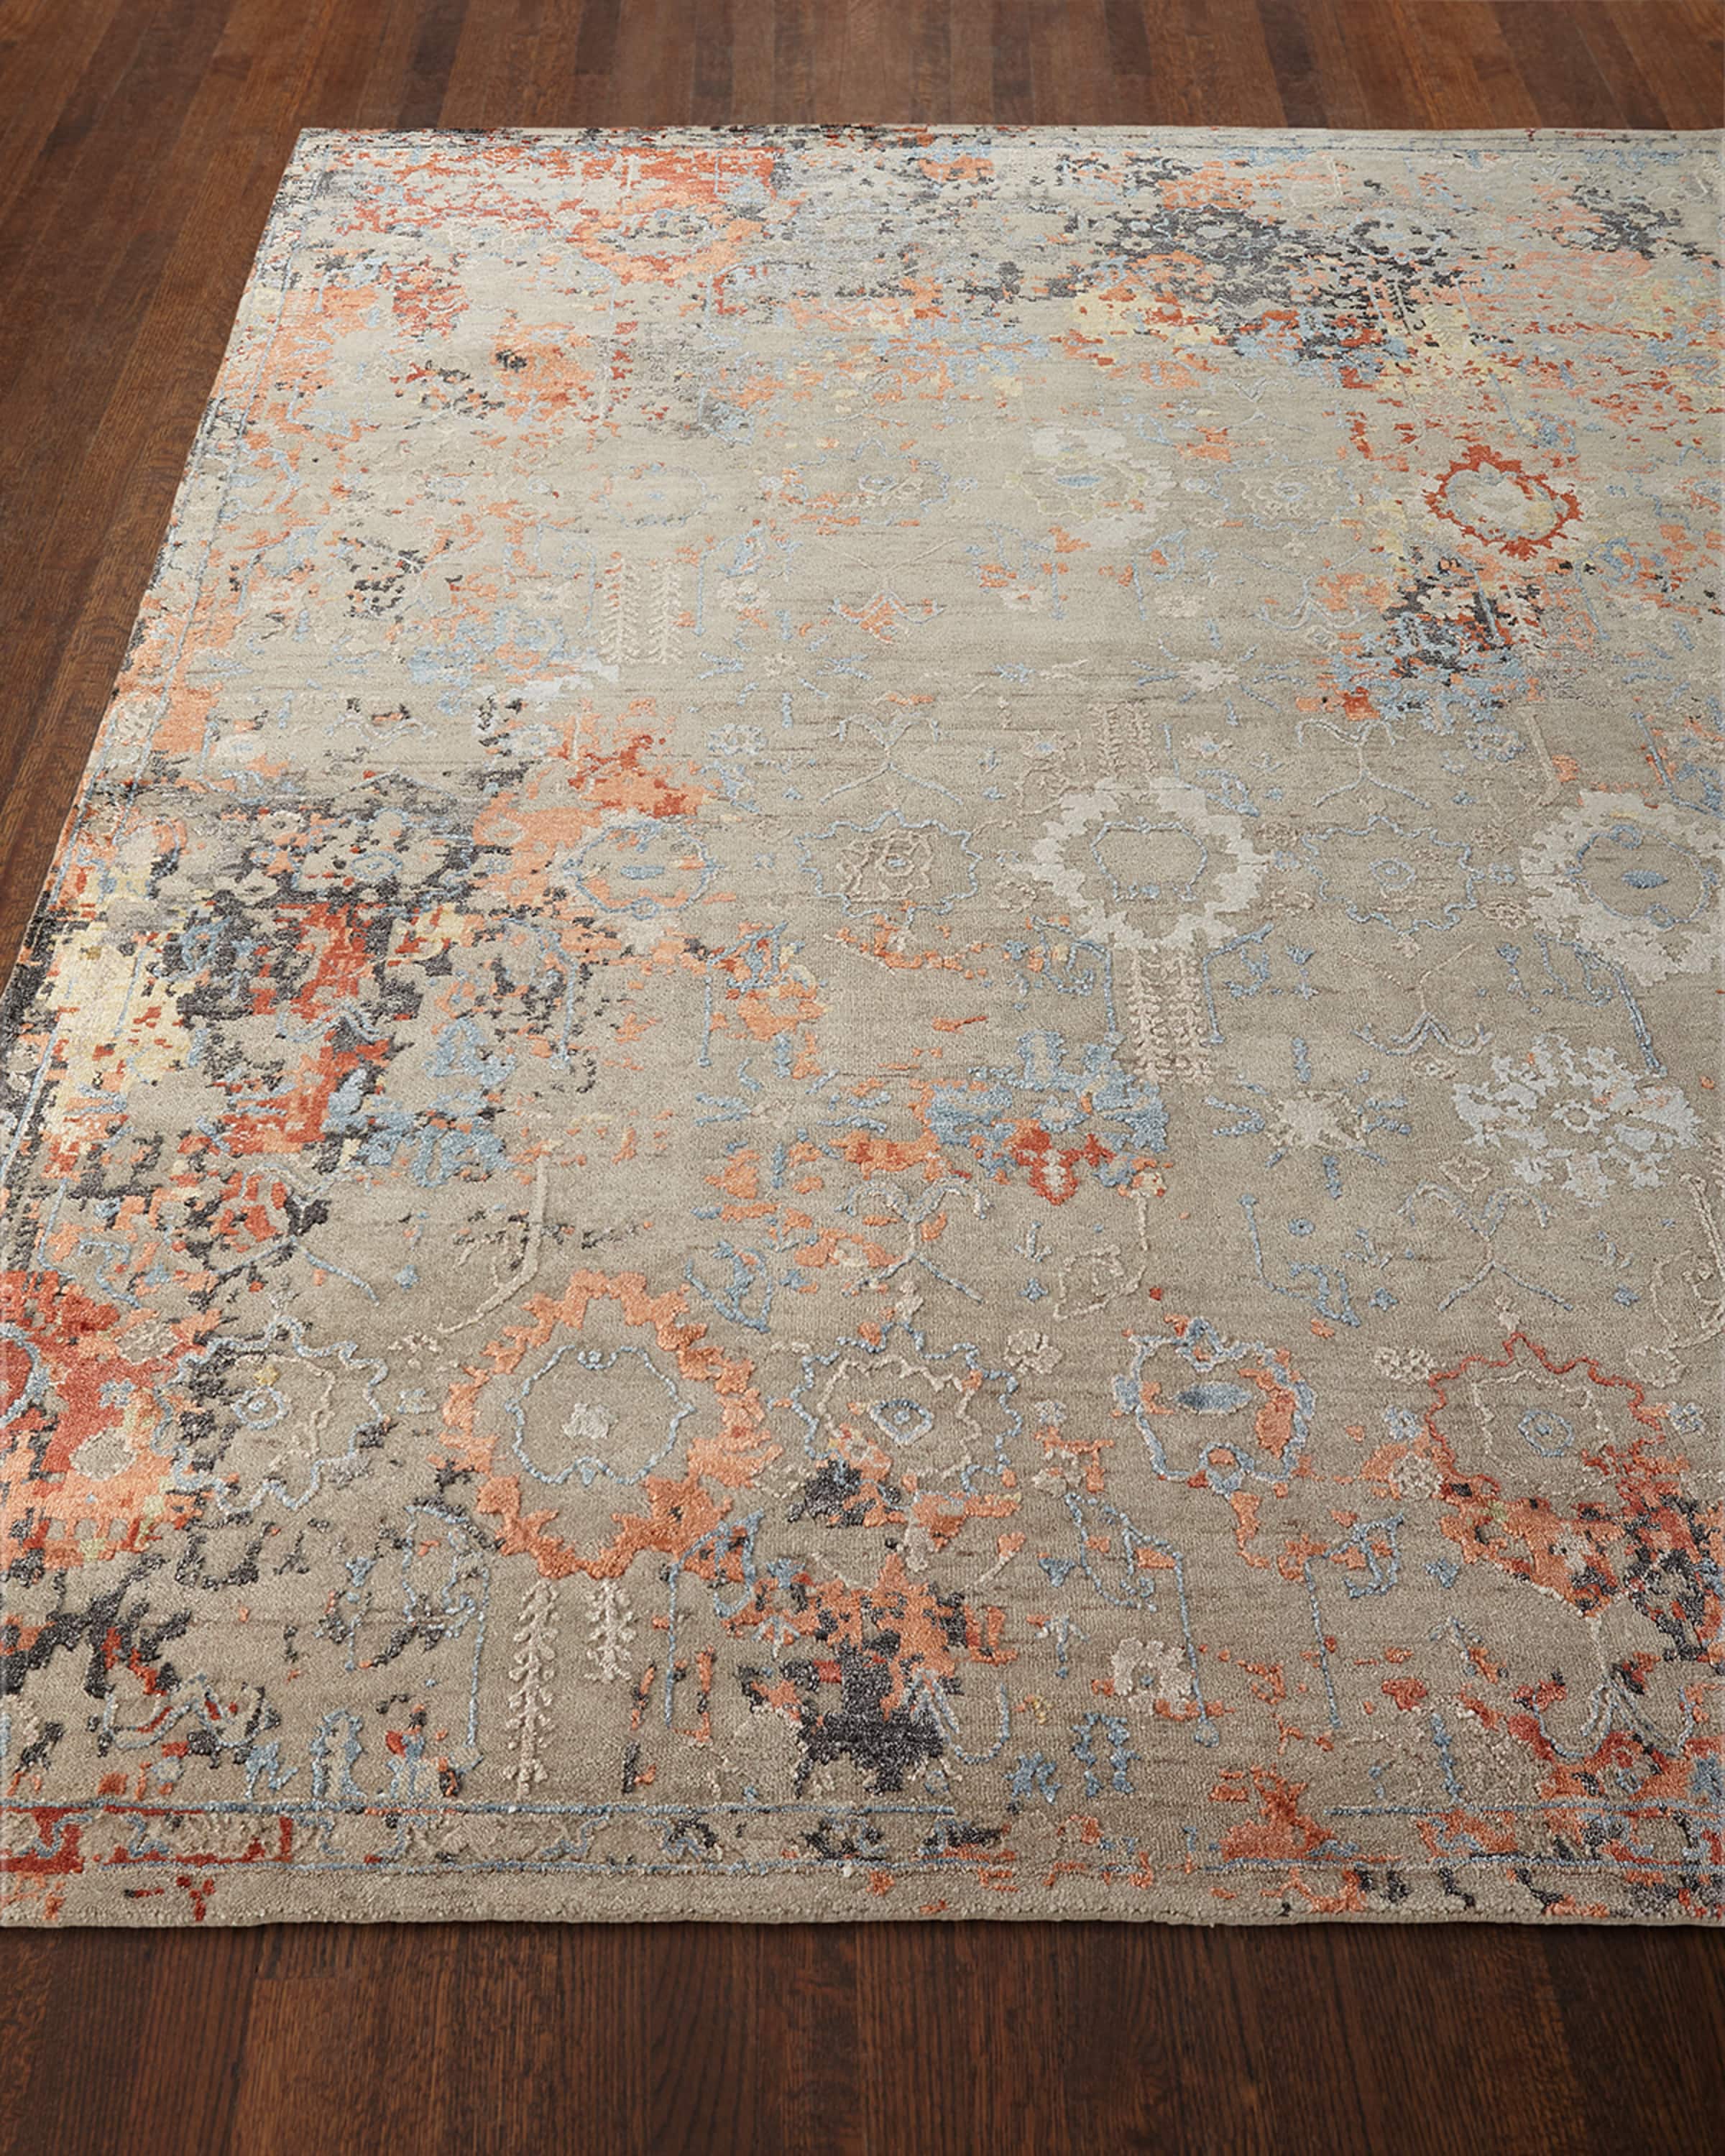 Jenzyn Hand-Knotted Rug, 8' x 10'